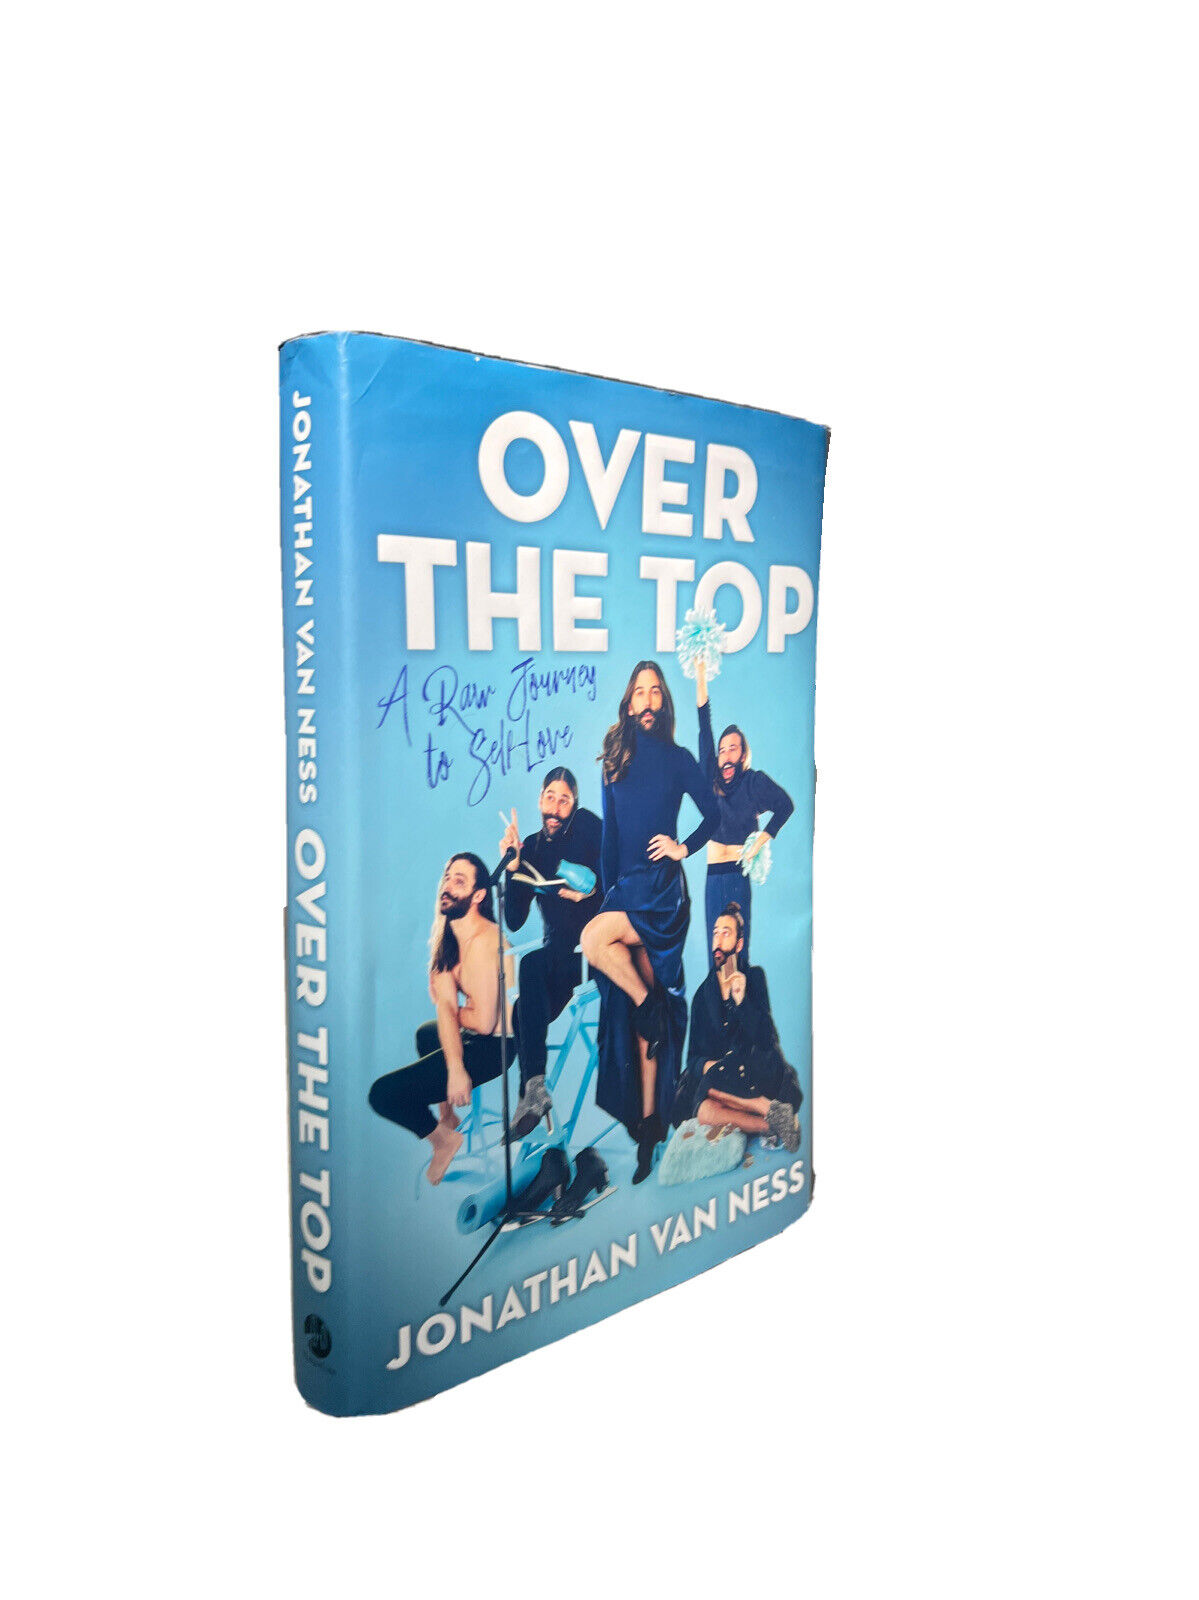 SIGNED Over the Top by Jonathan Van Ness, autographed